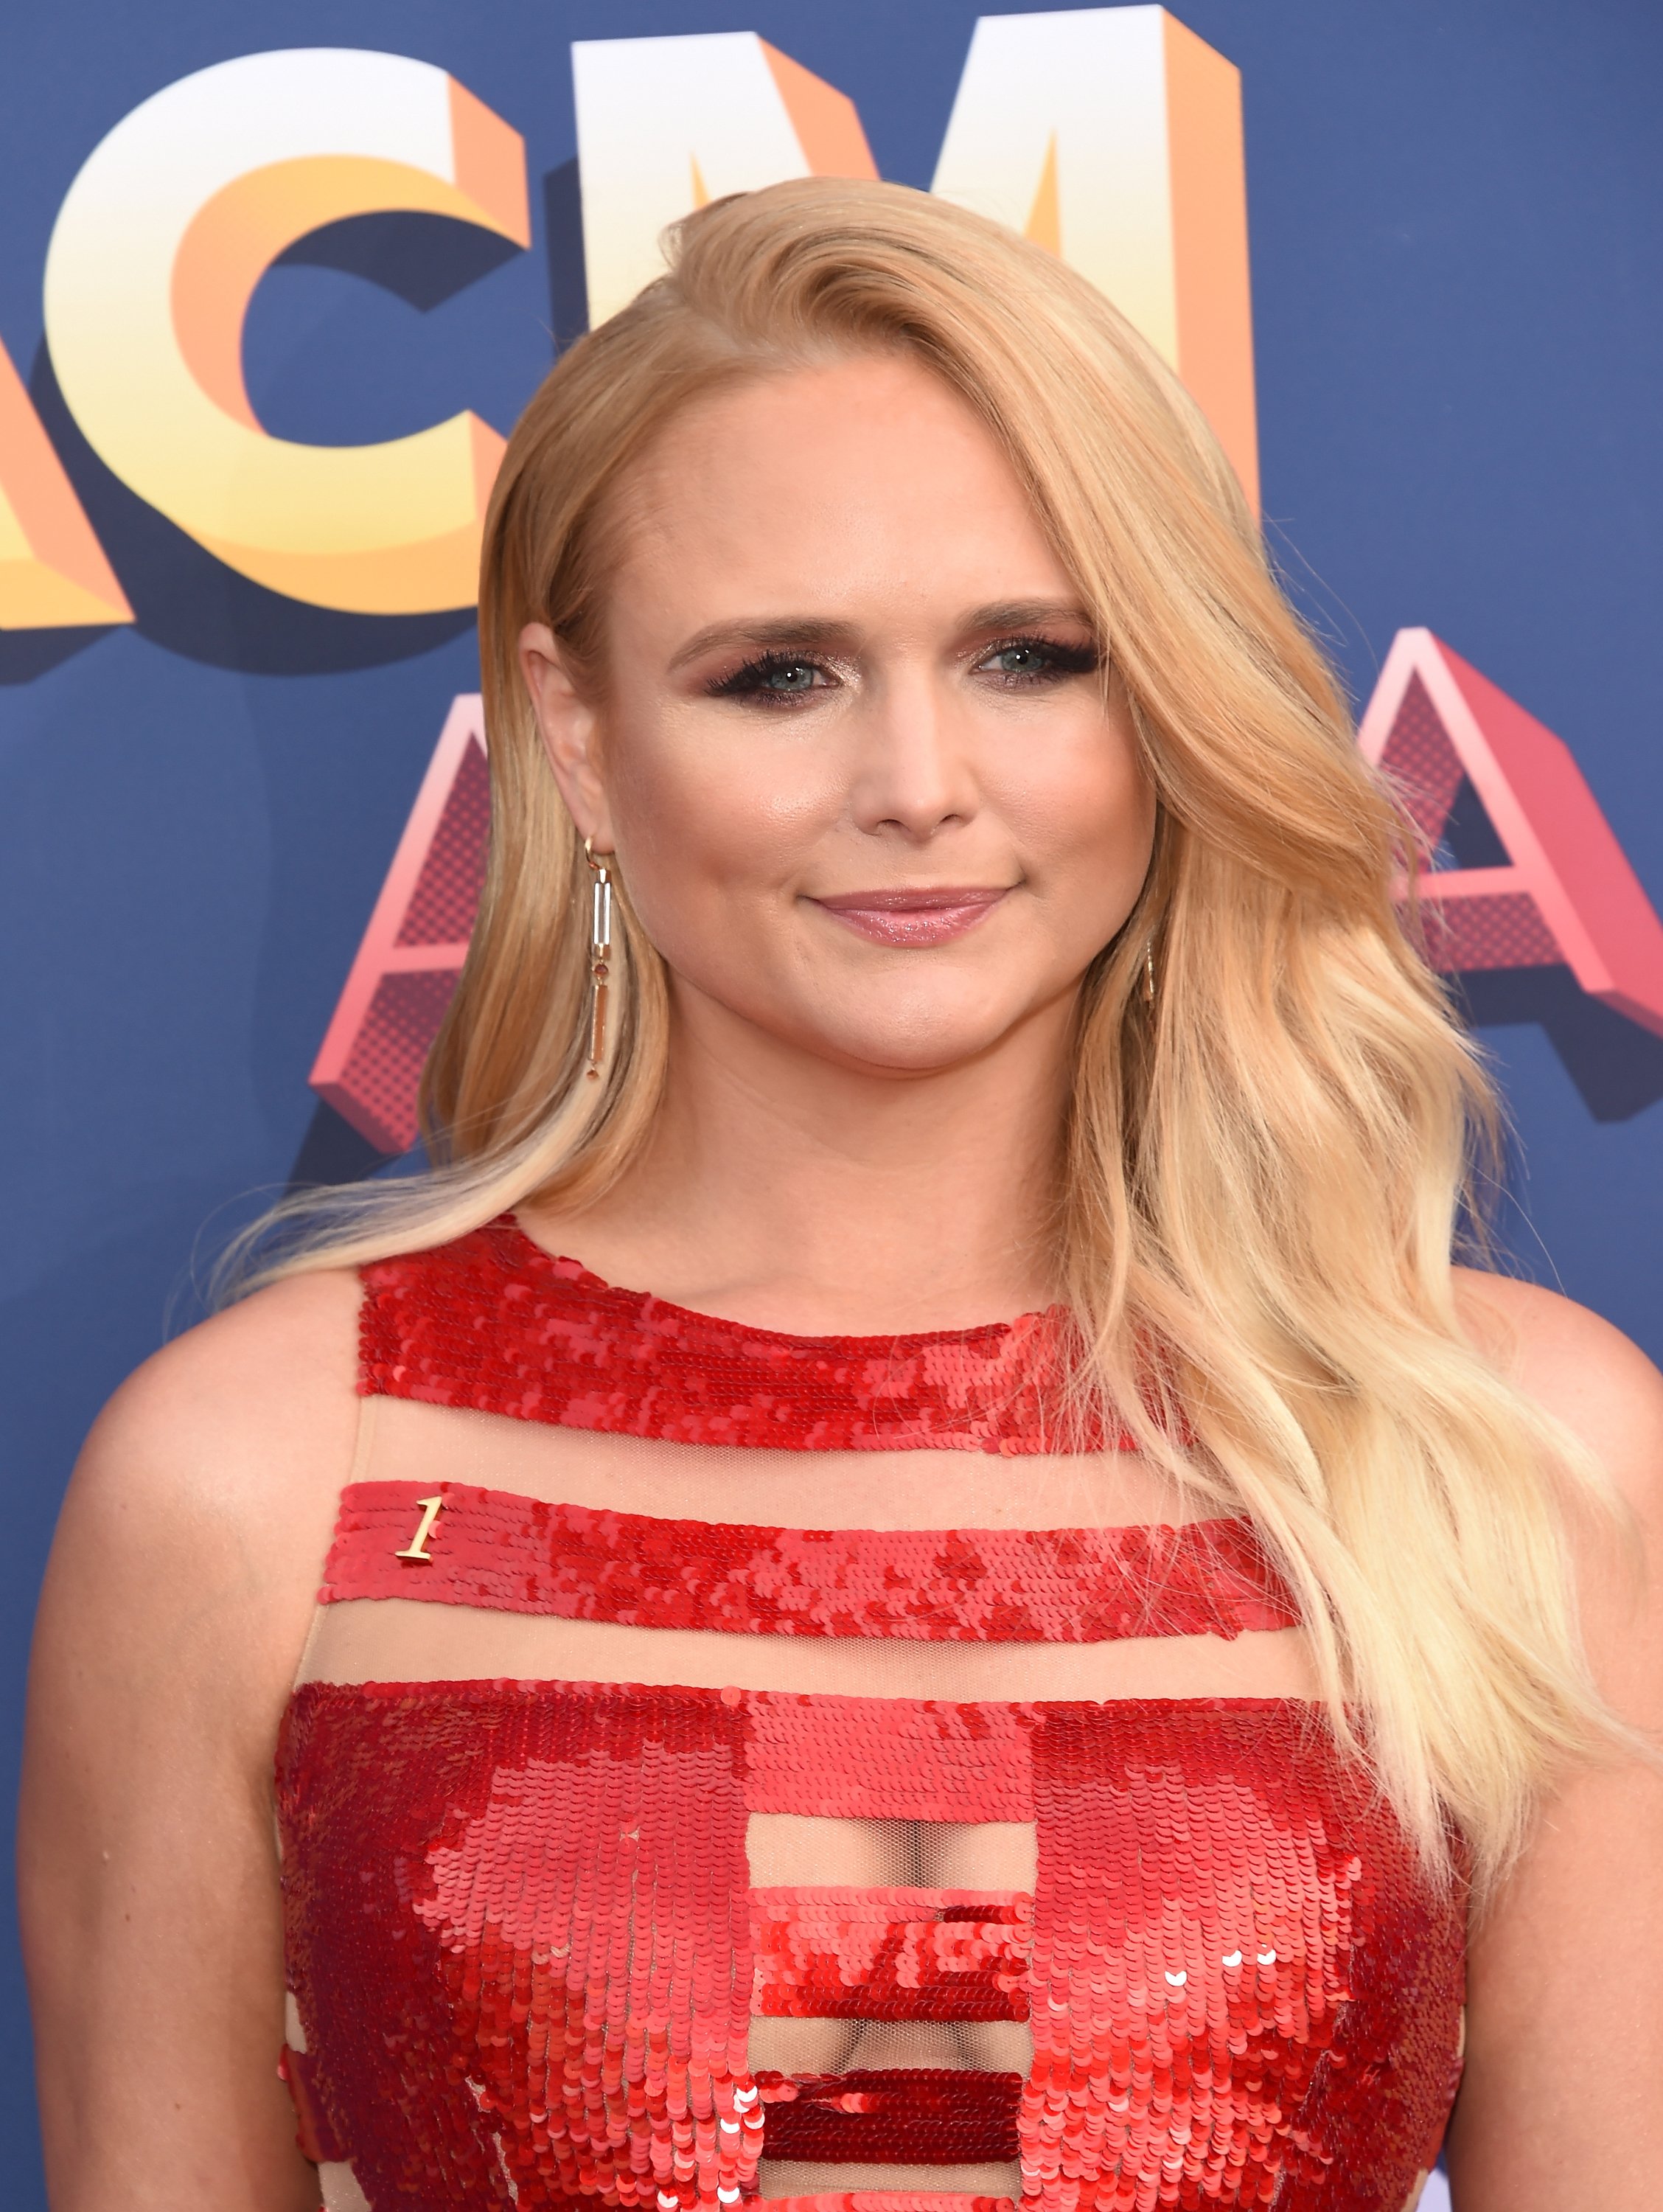 Miranda Lambert at the 53rd Academy of Country Music Awards in Las Vegas, Nevada. | Photo: Getty Images